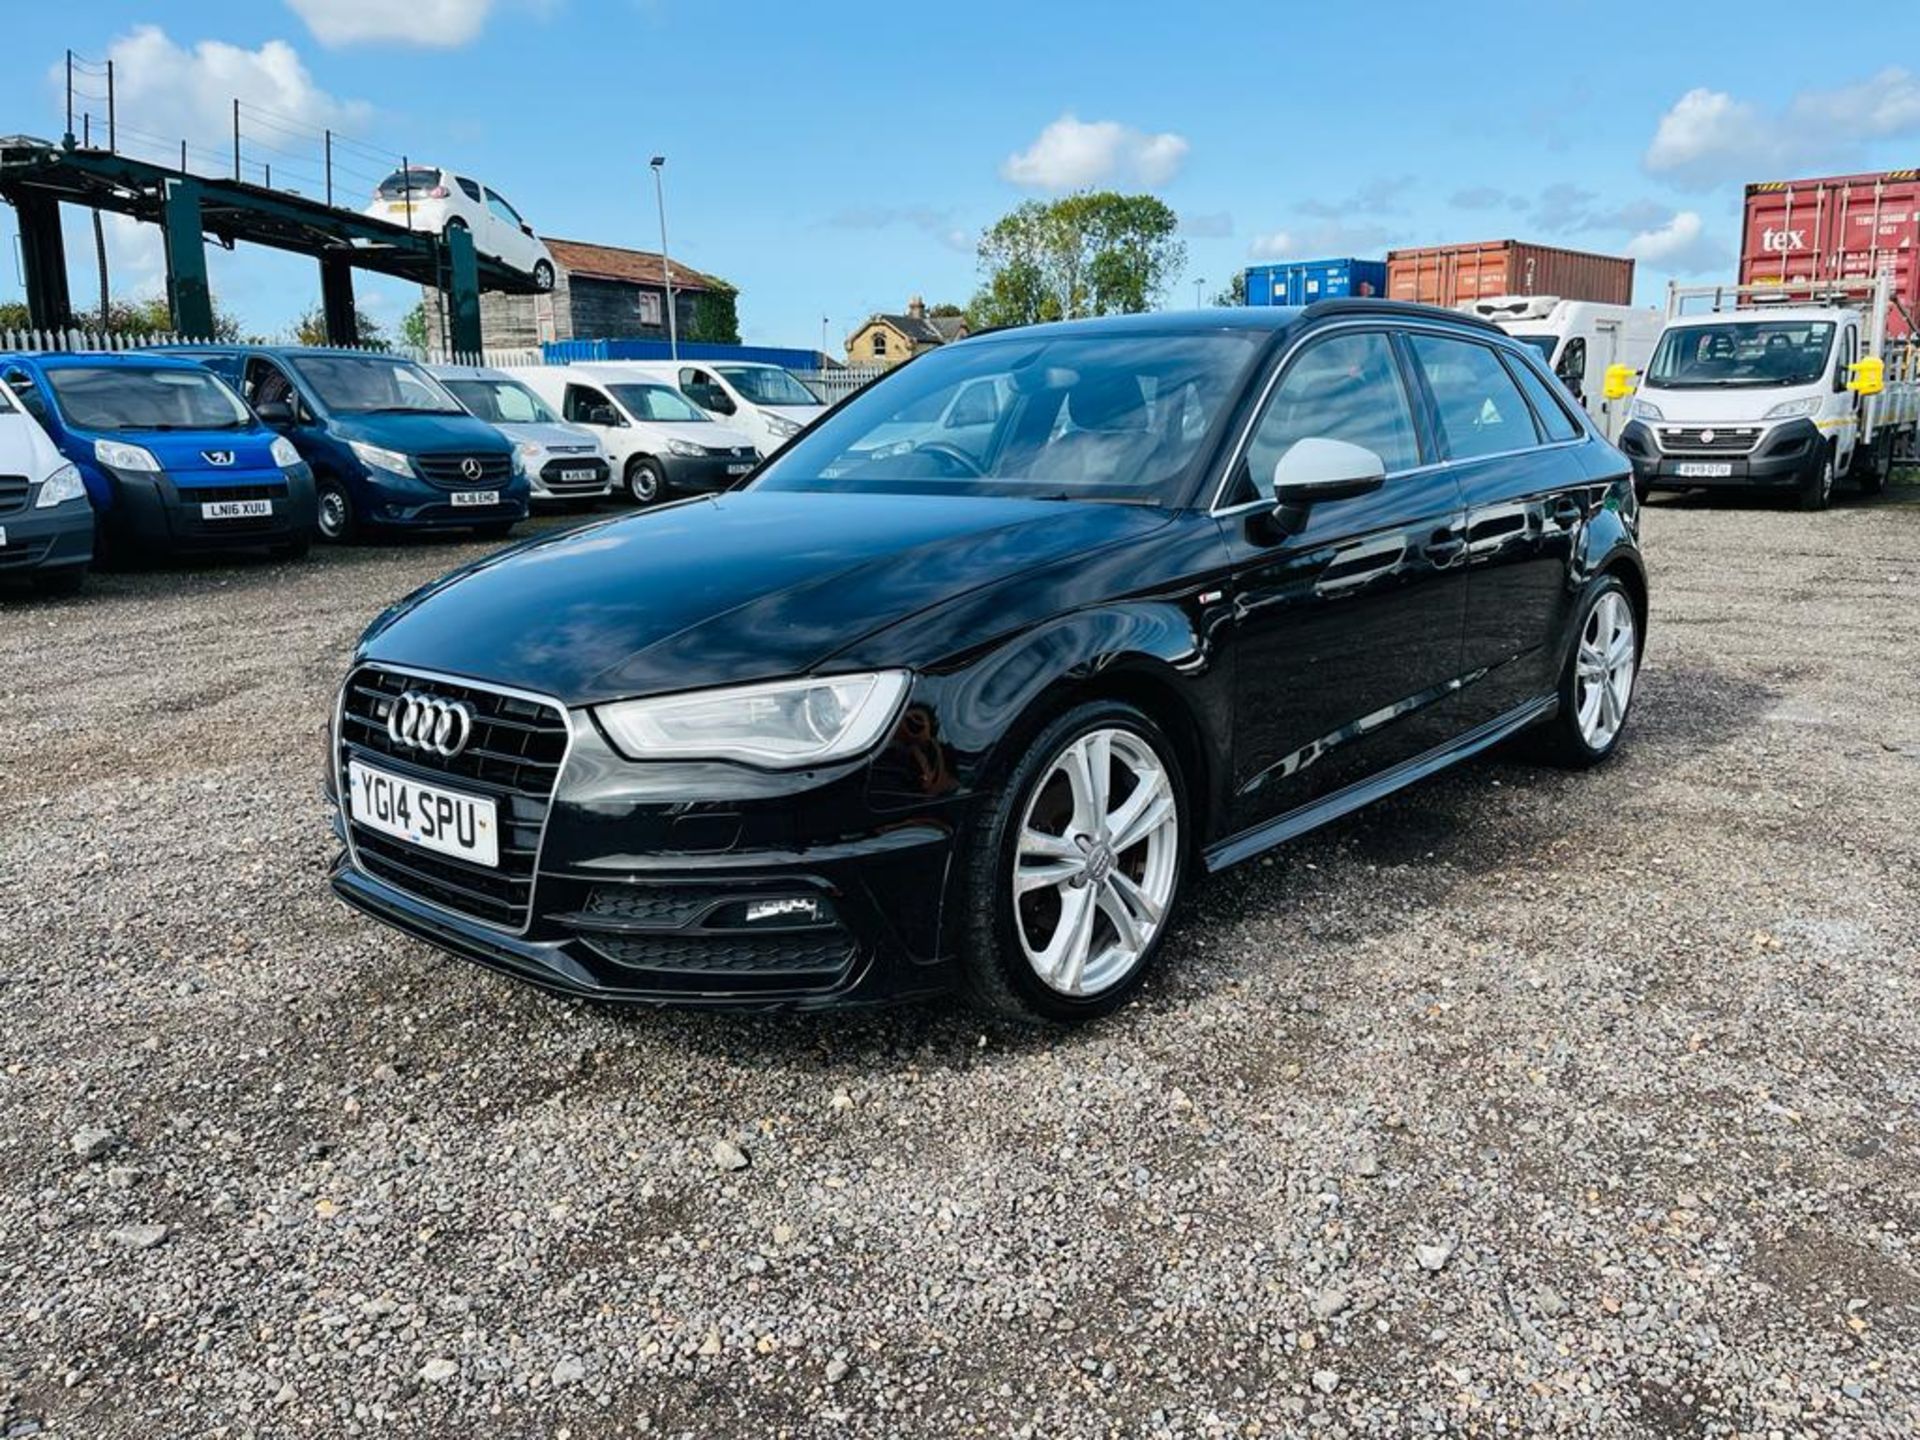 ** ON SALE ** Audi A3 S Line 105 TDI 1.6 2014 "14 Reg" Air Conditioning - Alloy Wheels - No Vat - Image 3 of 30